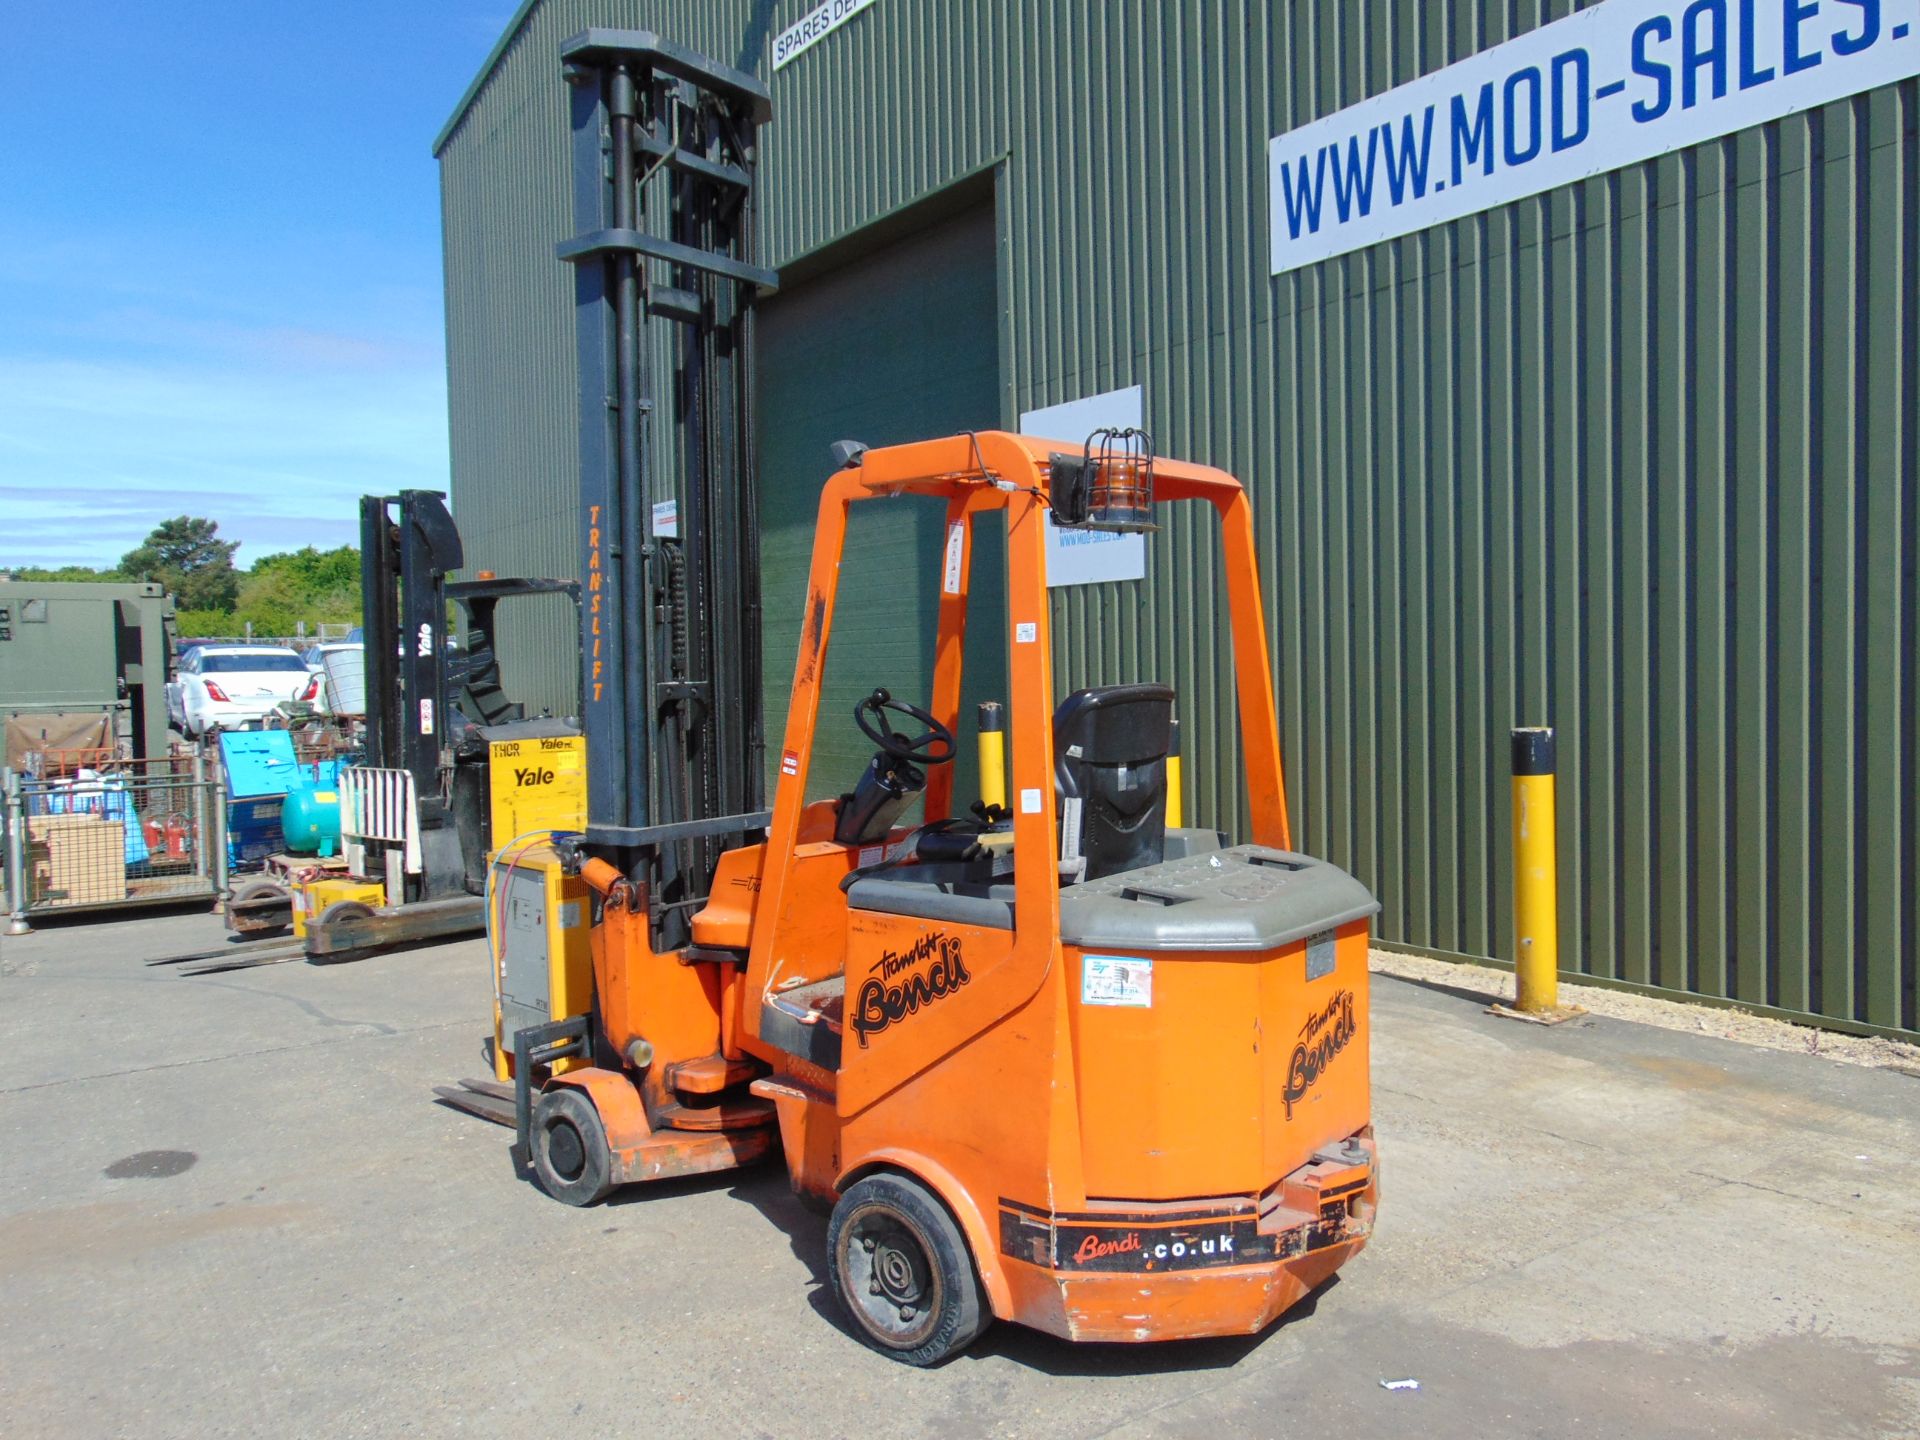 Translift Bendi Electric Reach Fork Lift Truck ONLY 264 hours! MOD Contract Fully Refurbished 2006 - Image 7 of 18